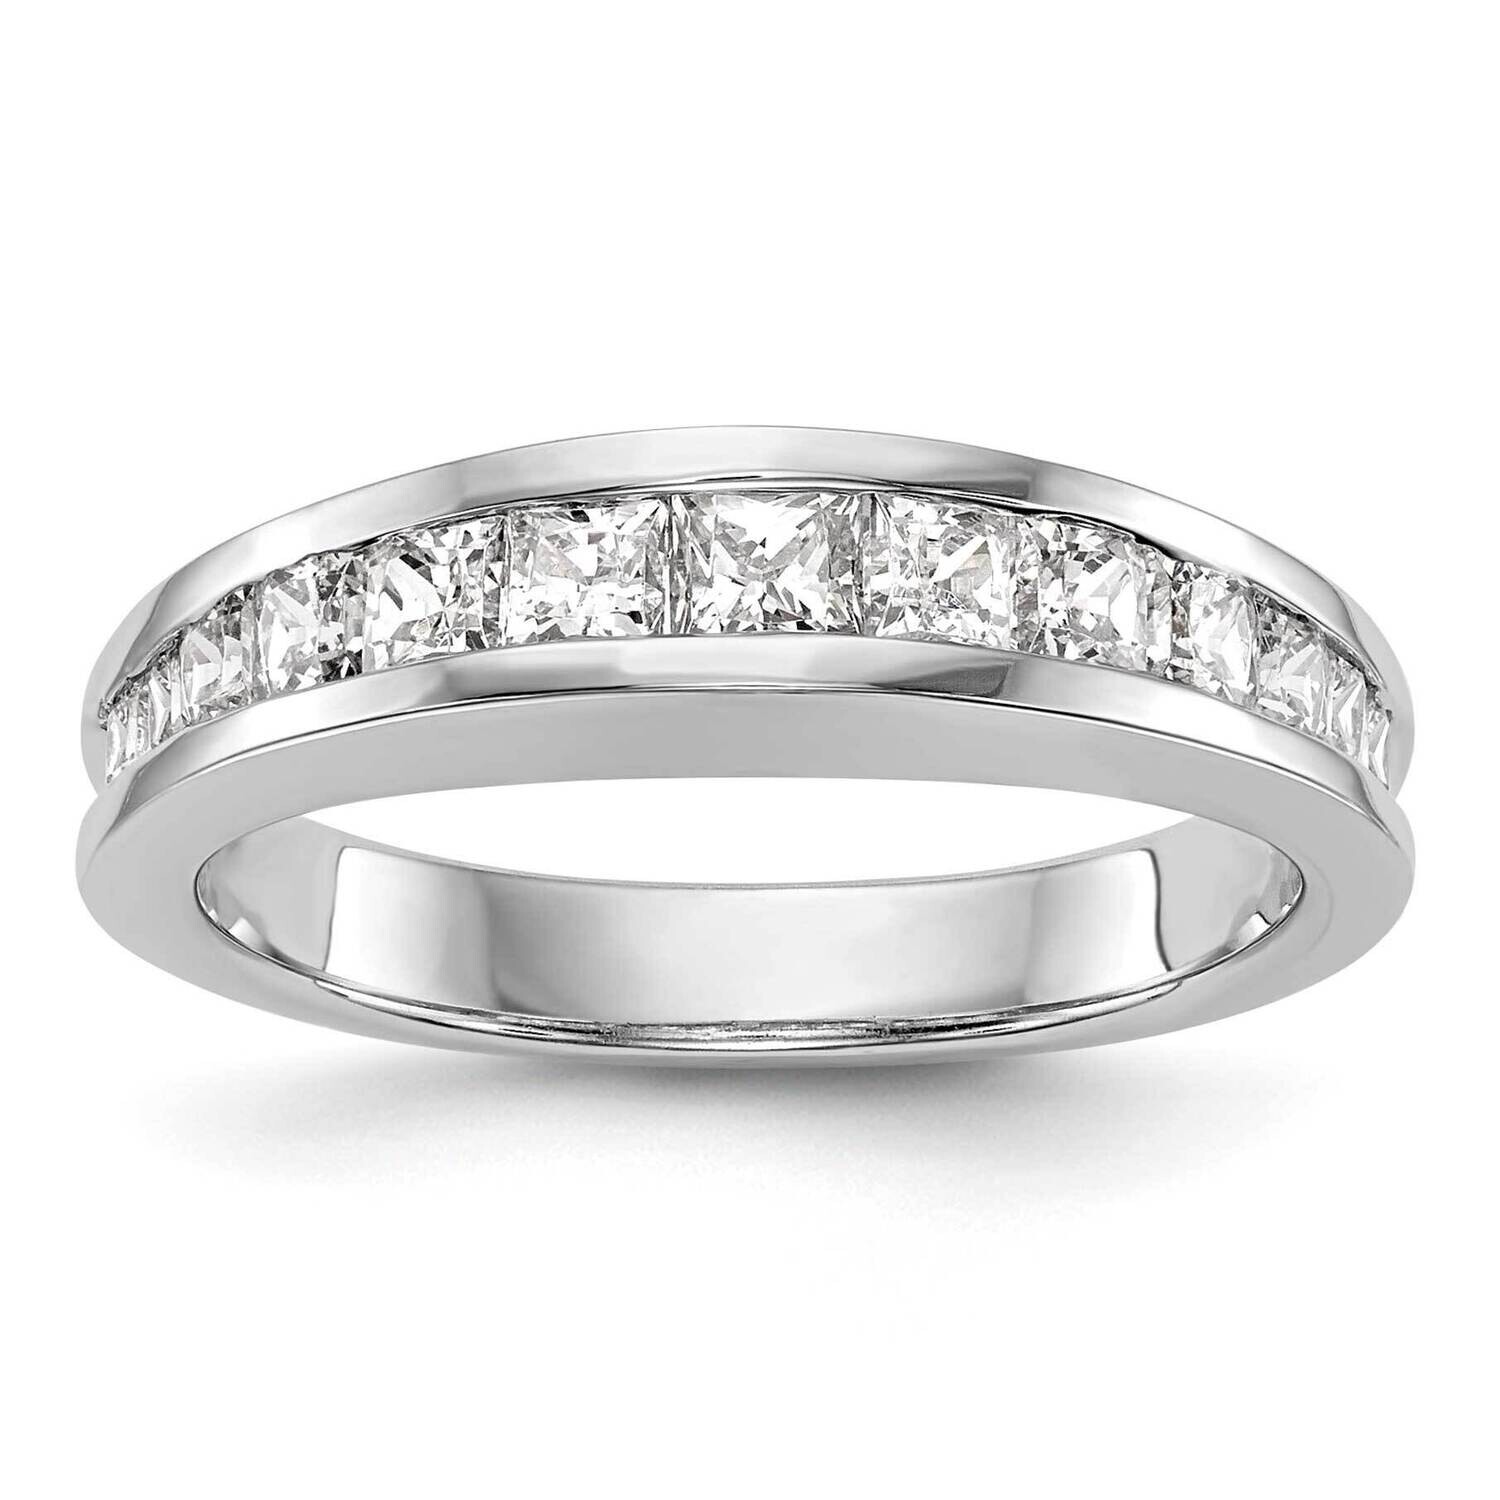 Princess Channel Wedding Band Ring Mounting 14k White Gold RM2689B-115-CWAA